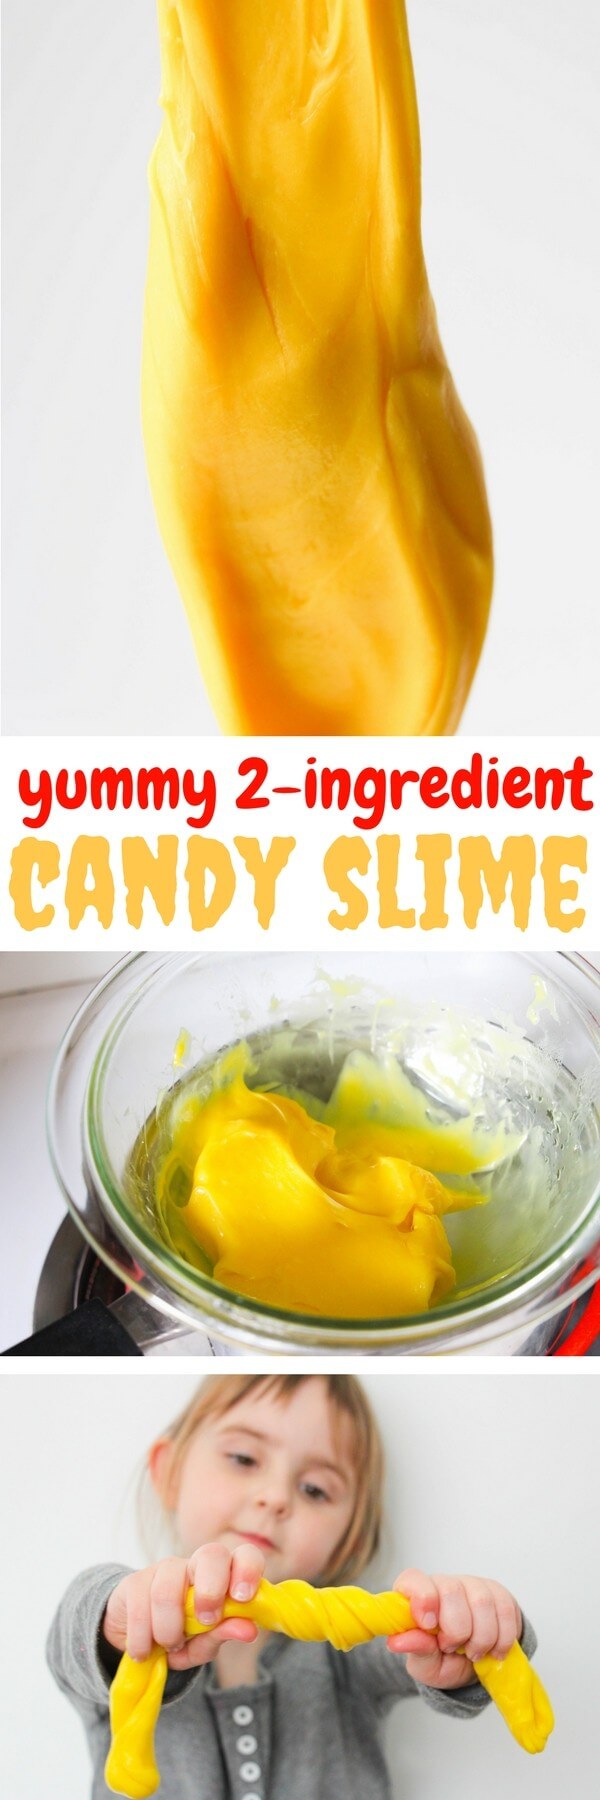 Yummy 2-ingredient Candy Slime recipe that you can actually eat! Edible slime is a safer option when you have younger siblings in the house or sensitive skin issues that get irritated by borax or liquid starch. (Needless to say this is borax-free slime.)